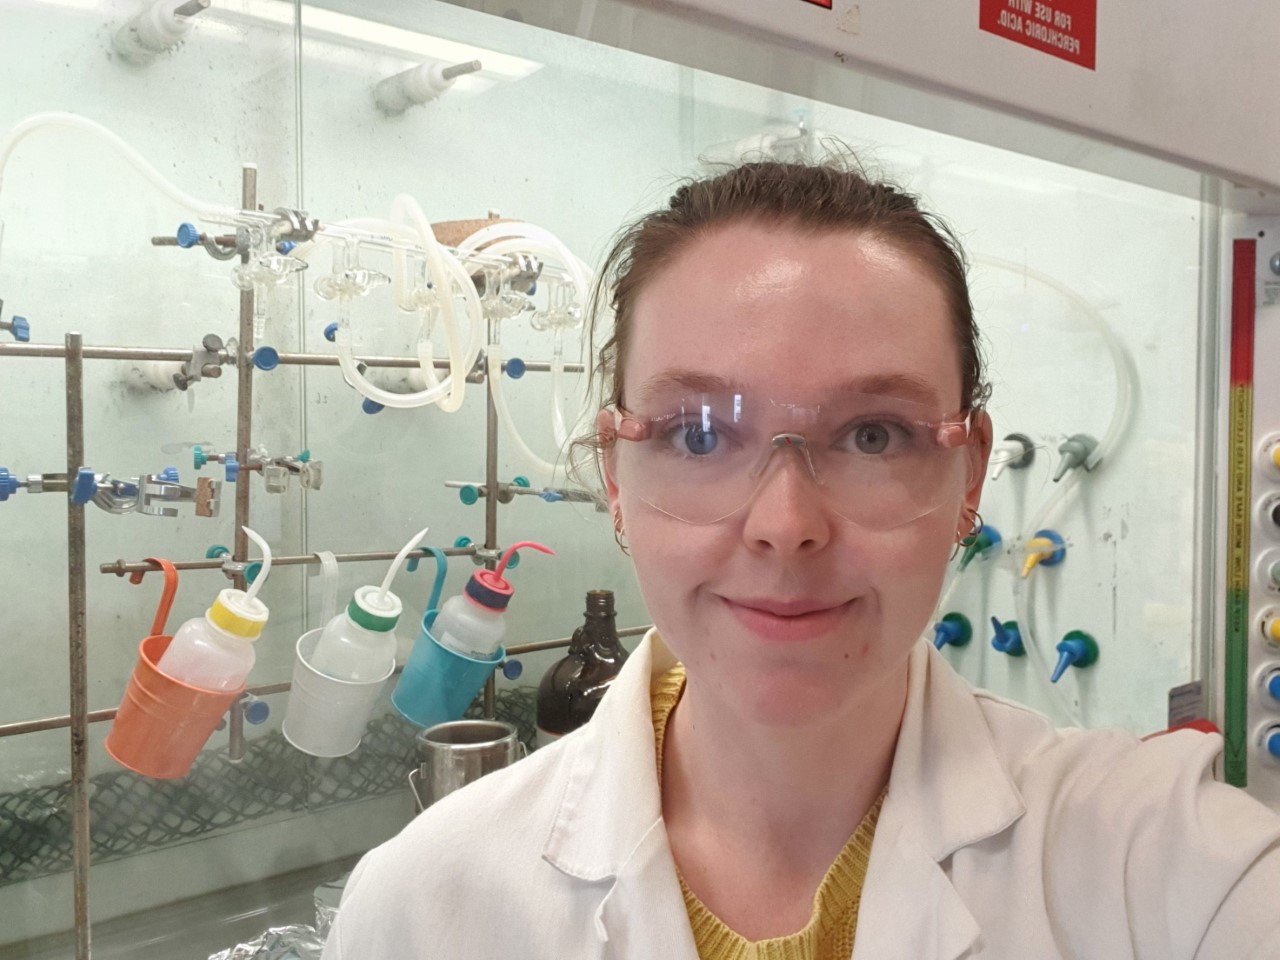 A chemist with a passion for scicomm: Meet Sam